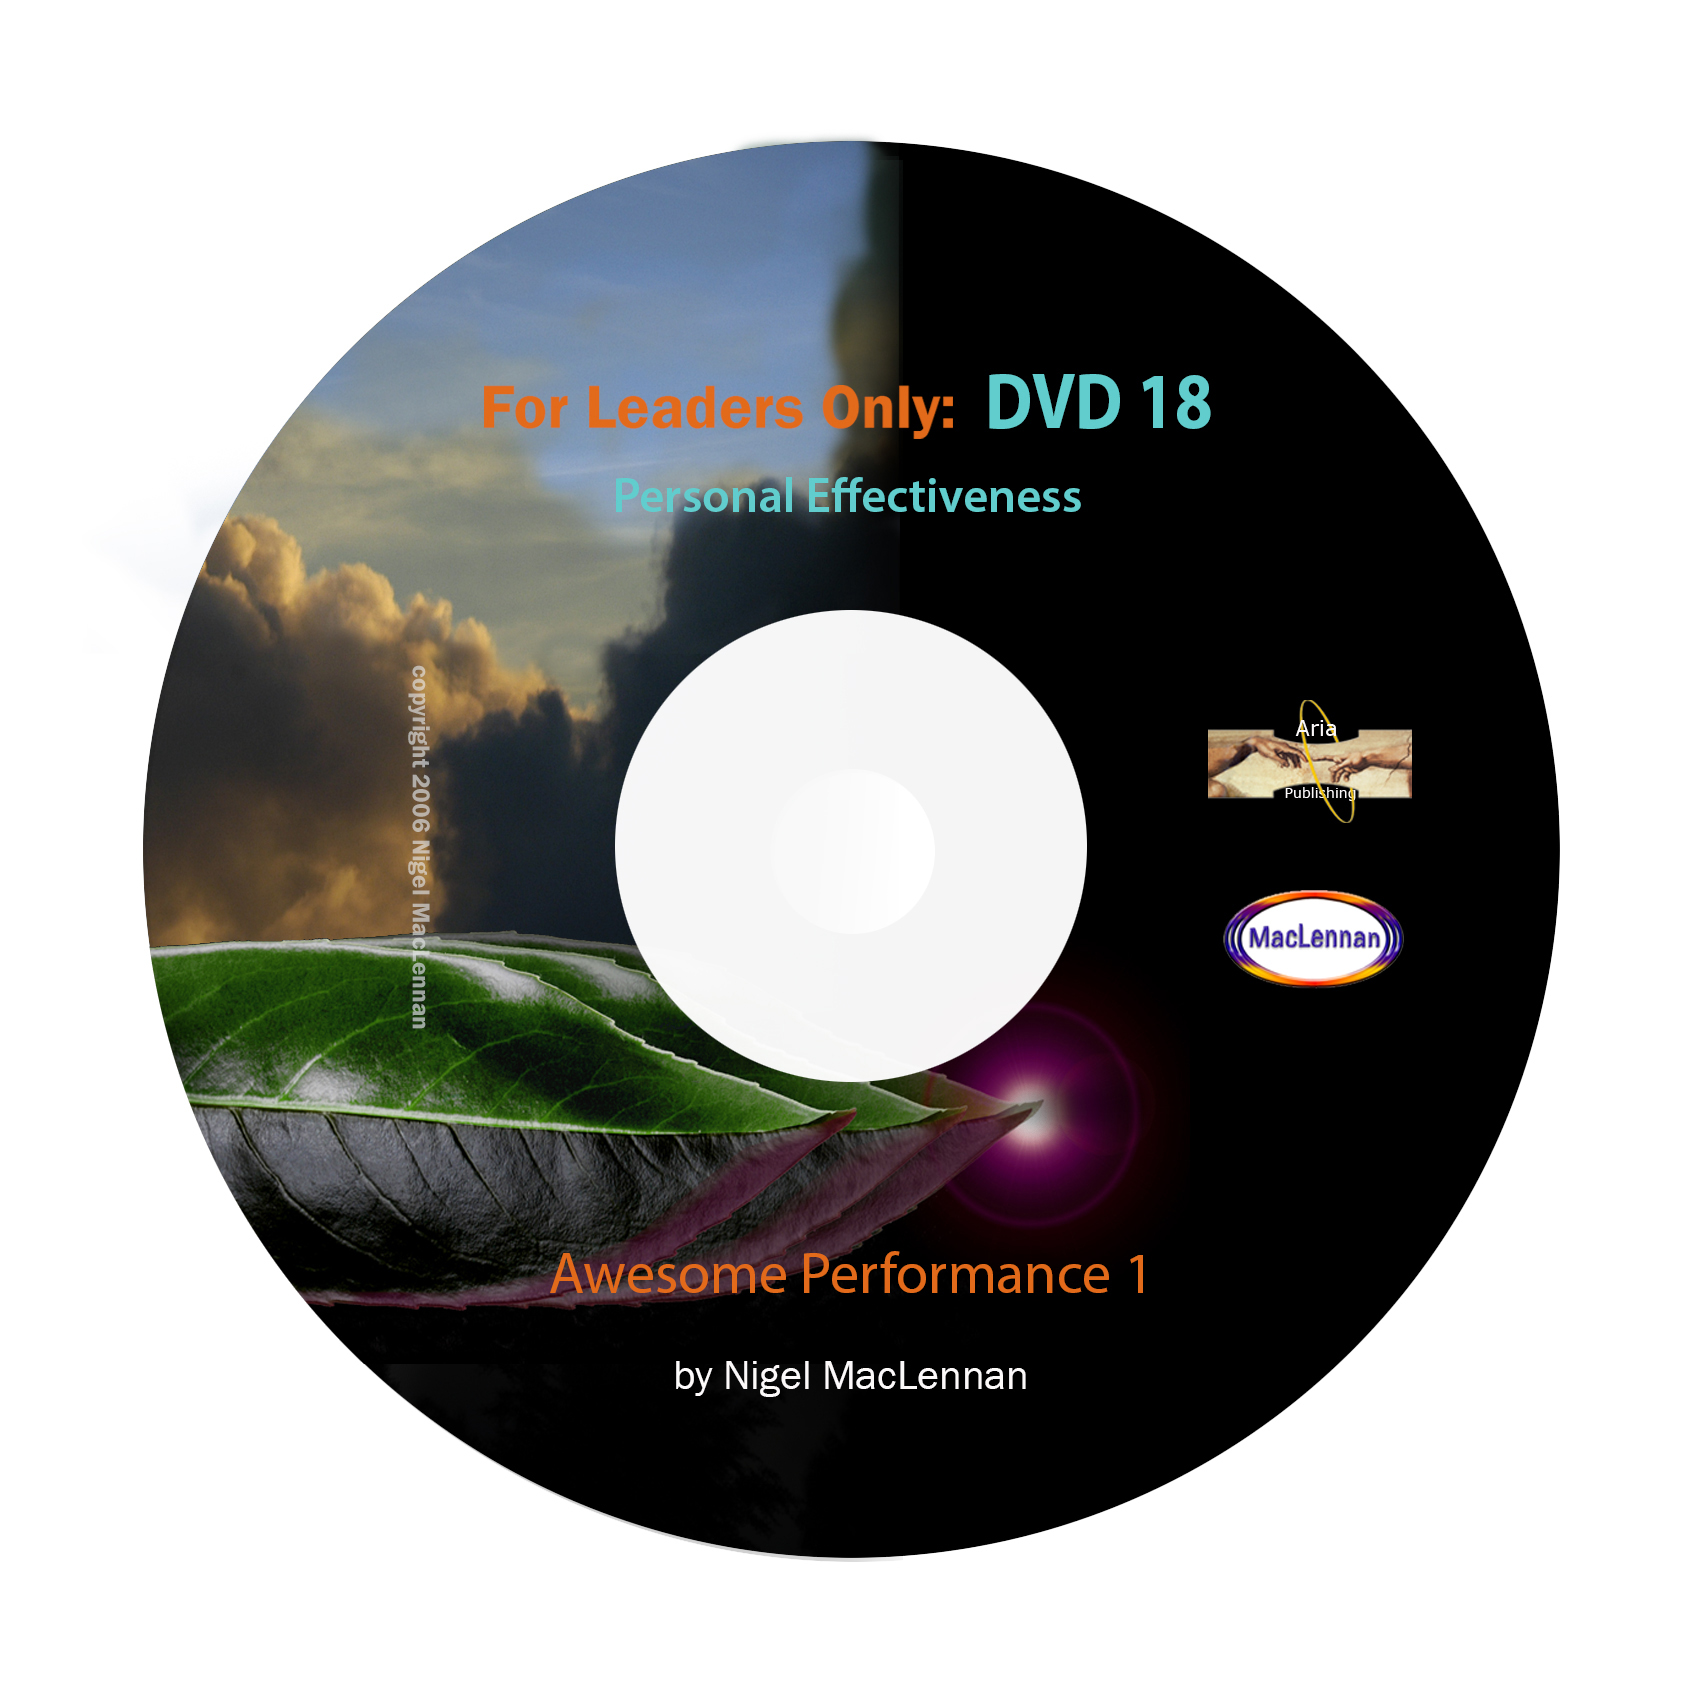 For Leaders Only - Awesome Performance 1 DVD